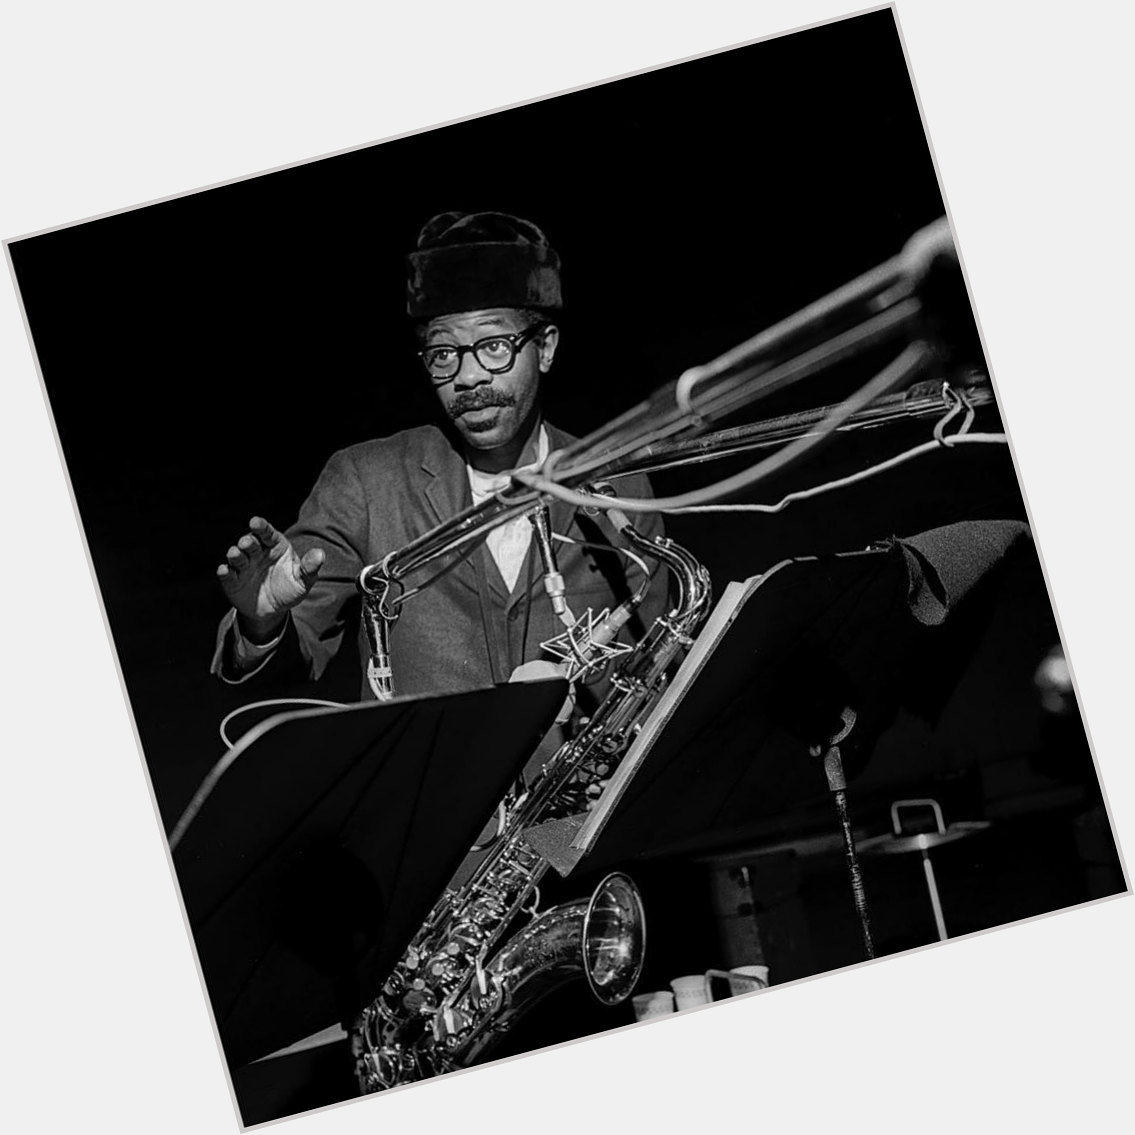 Also happy birthday to the (Joe Henderson), one of my favorite musicians of all time 